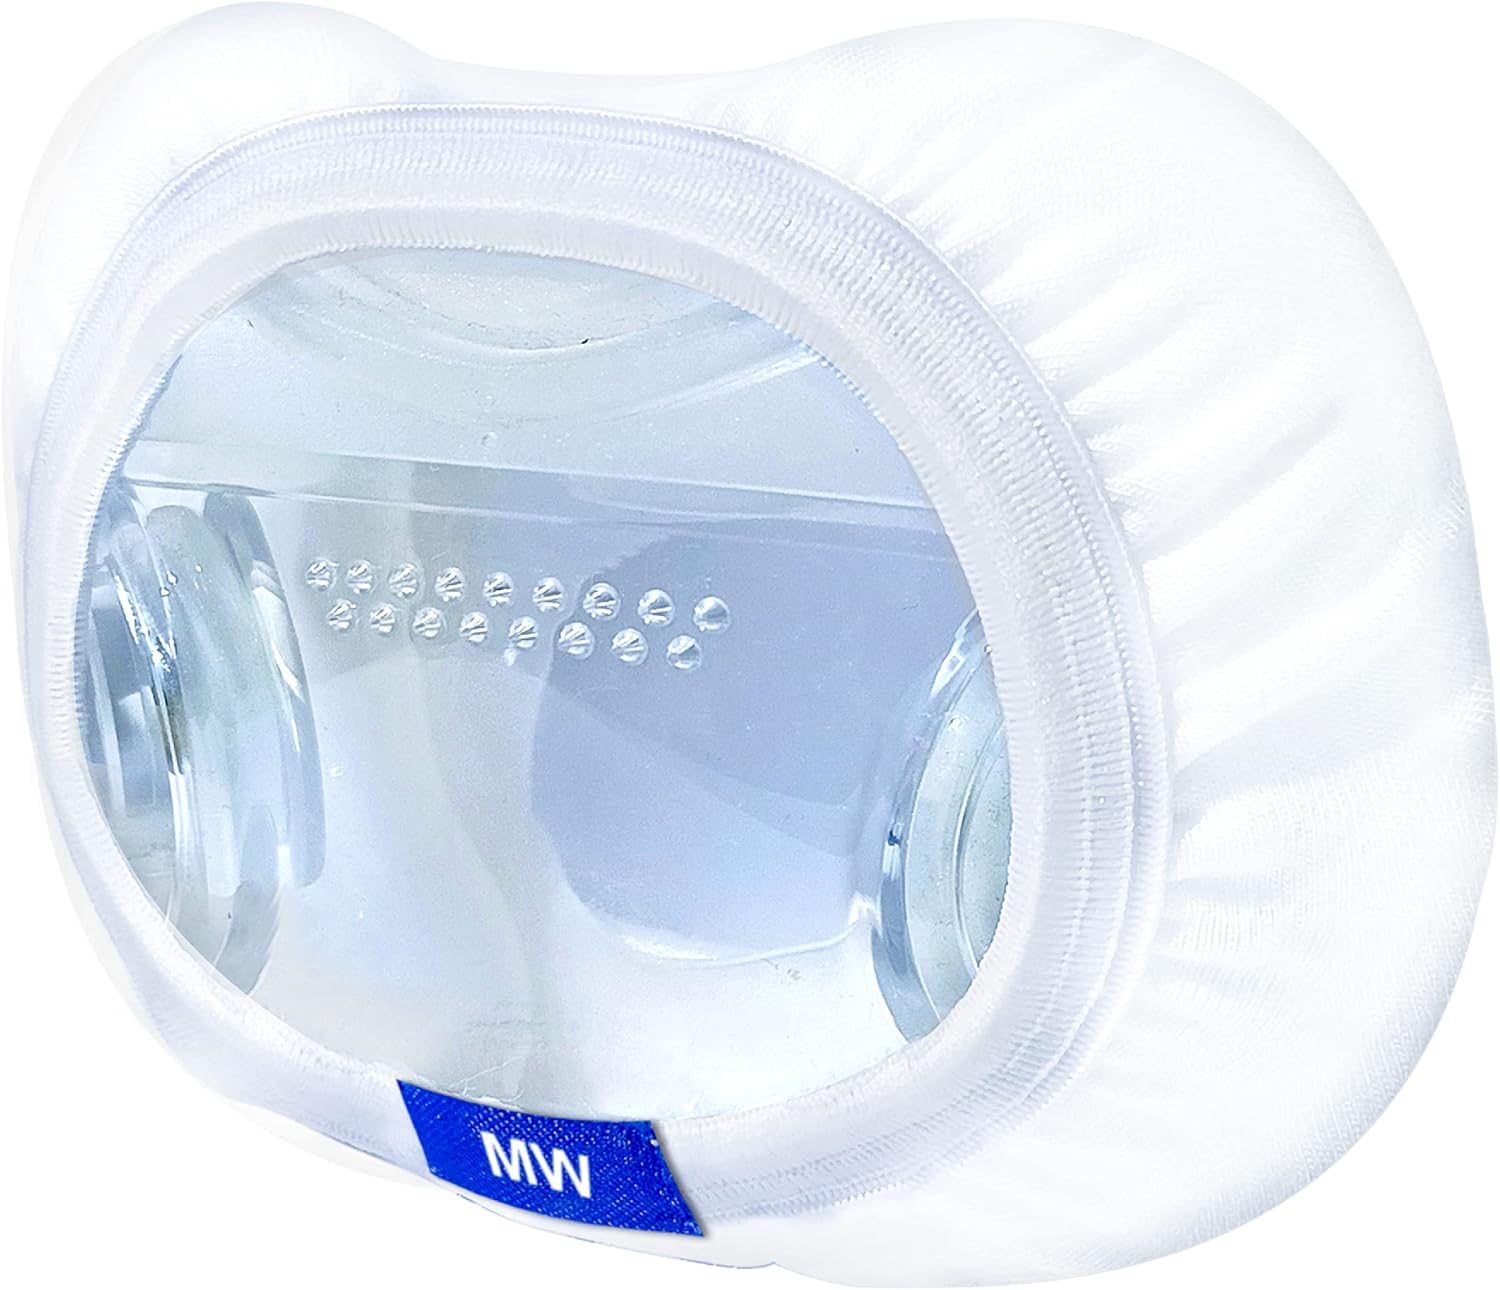 resplabs CPAP Mask Liners Compatible with the Philips Respironics DreamWear Full Face CPAP Mask - resplabsresplabs